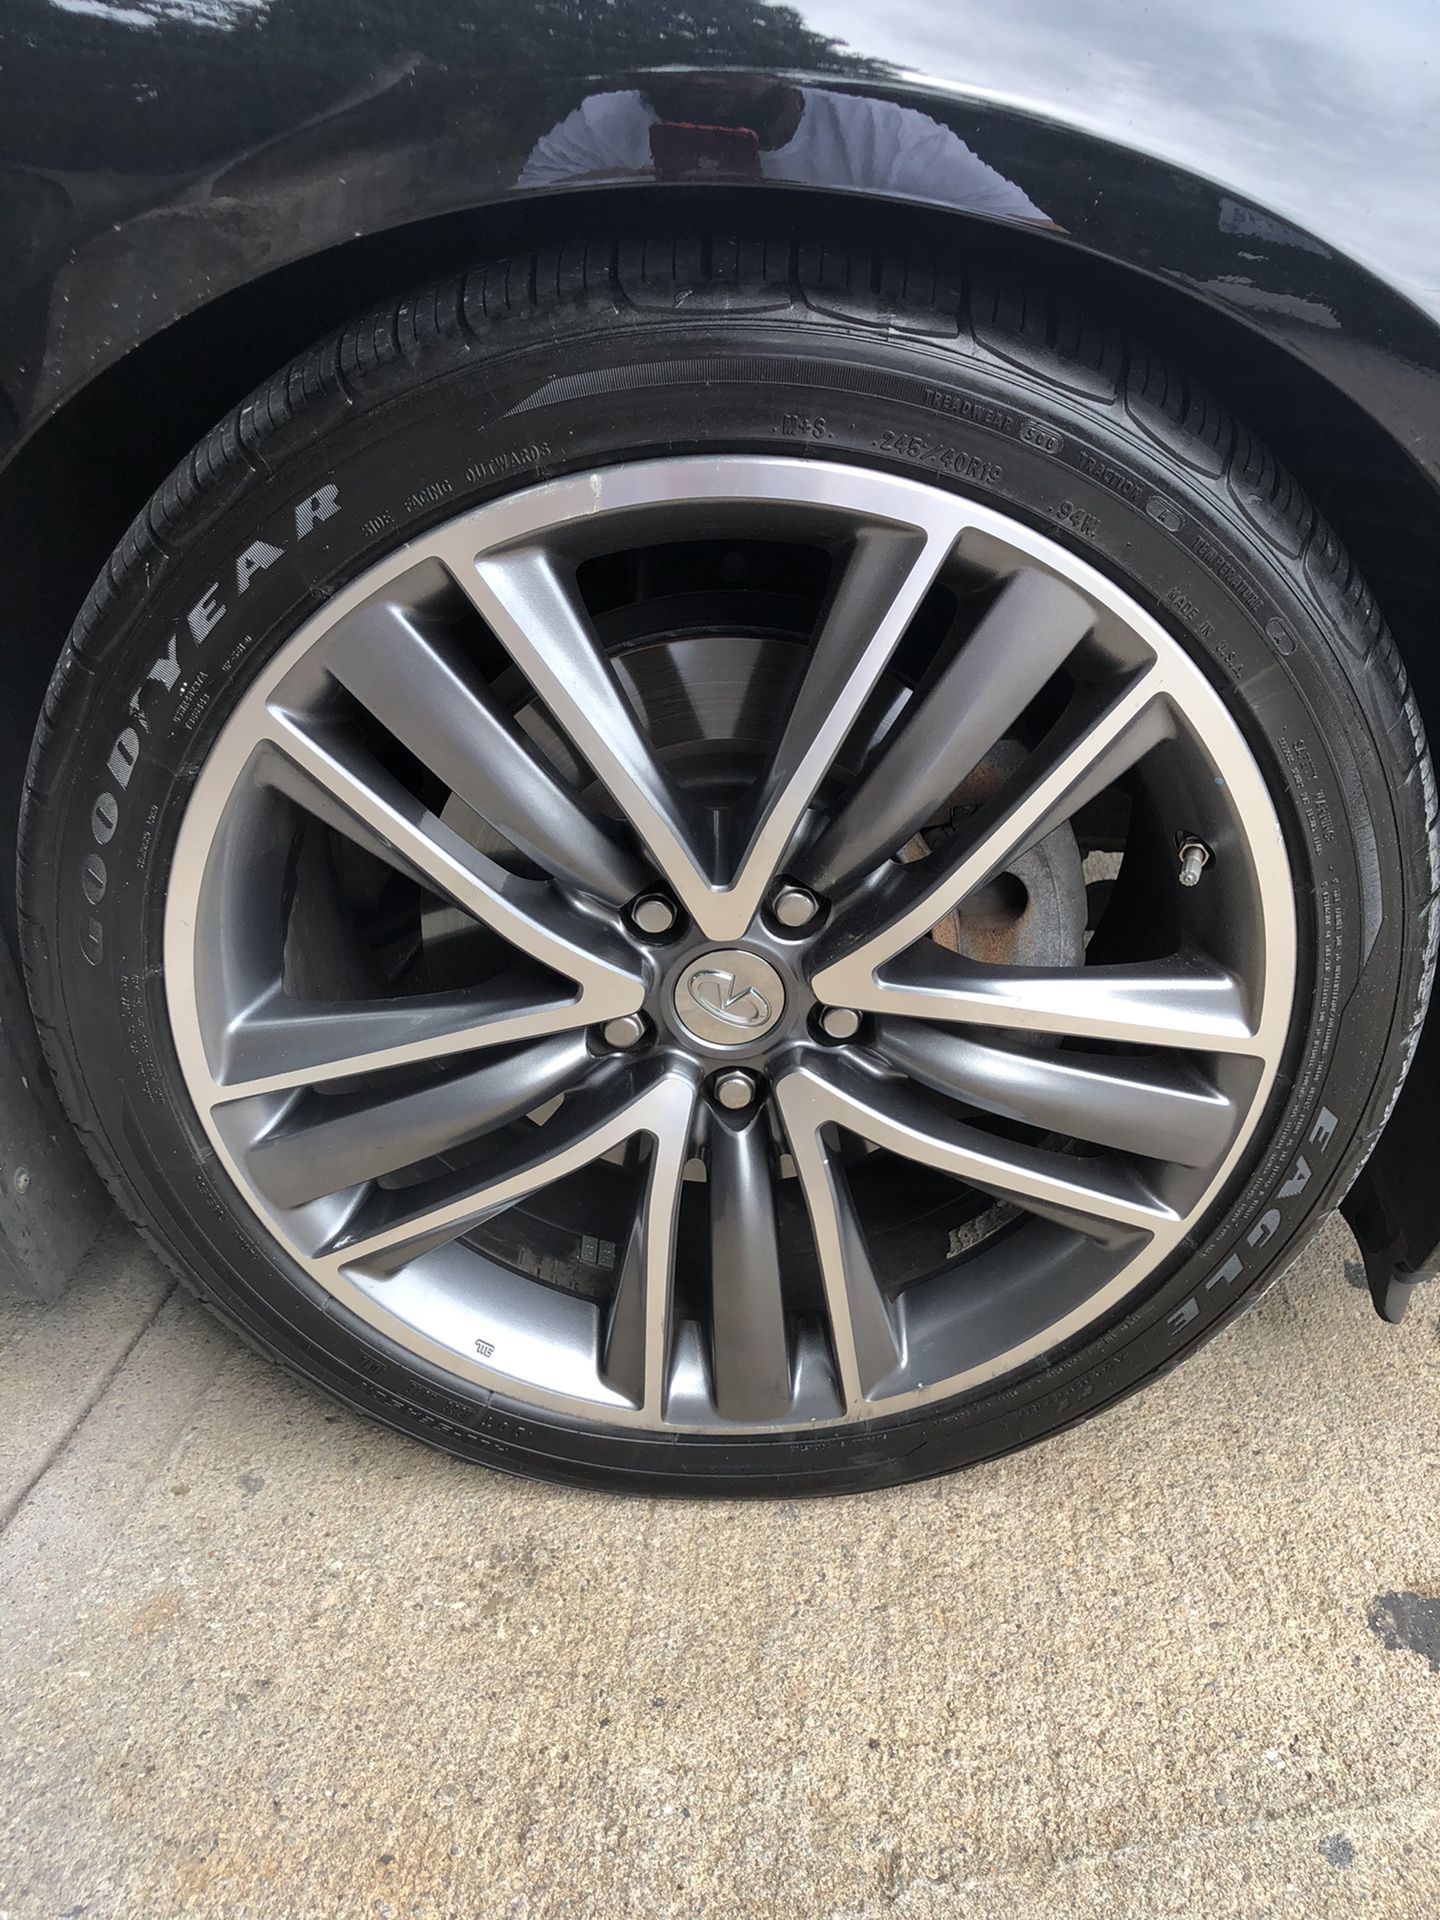 Infiniti Q50 s 19 wheels with brand new tires